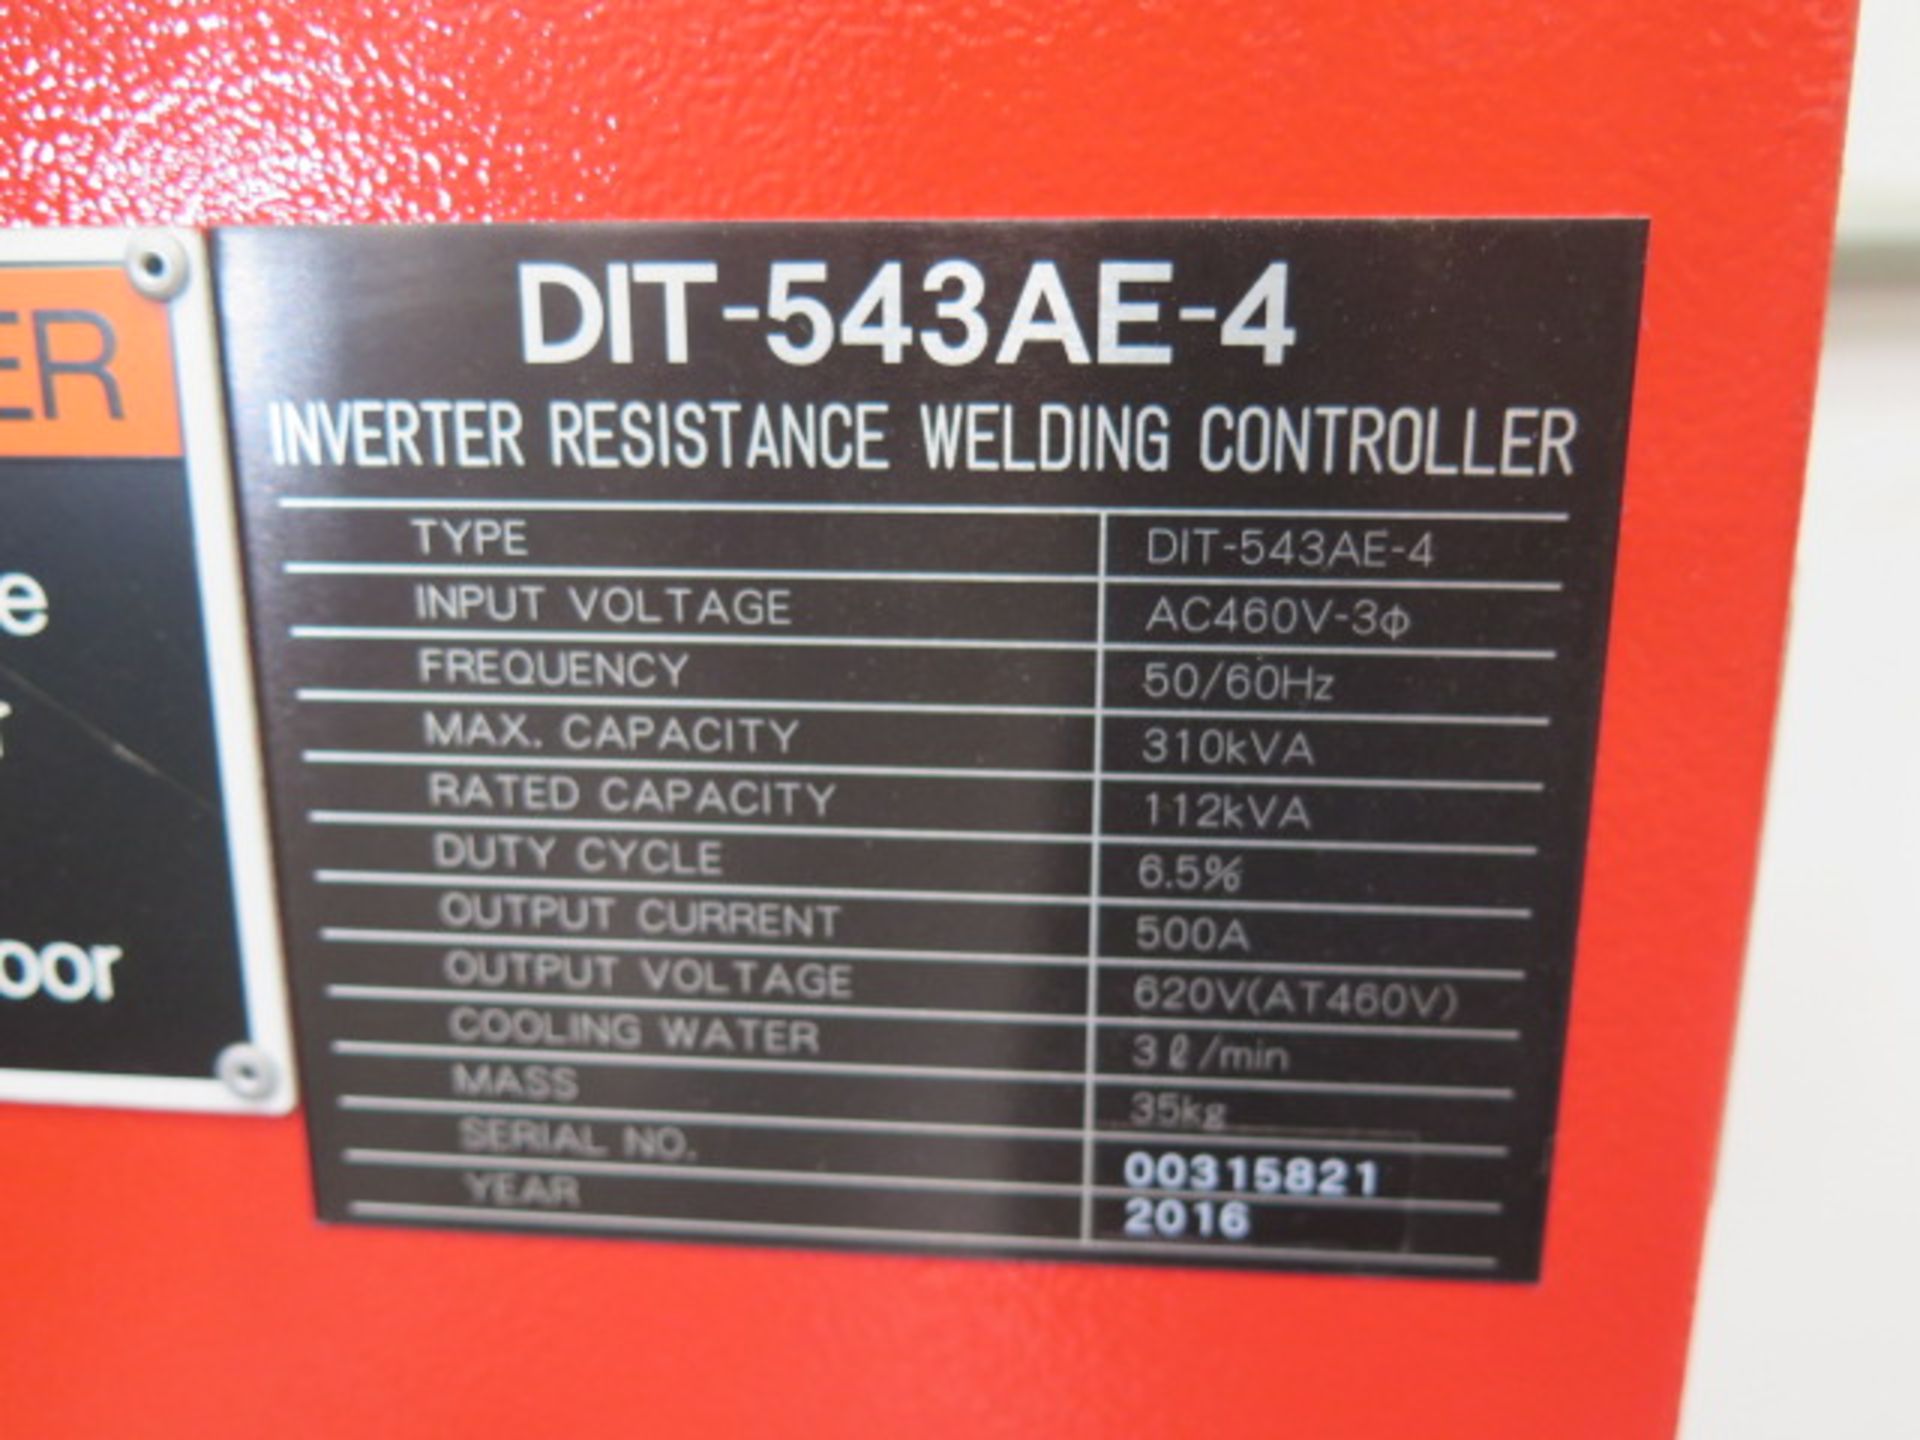 2017 Amada ID40 IV HP-NT 257kVA Spot Welder s/n 80460065 w/ Amada Touch Screen Controls, SOLD AS IS - Image 14 of 16